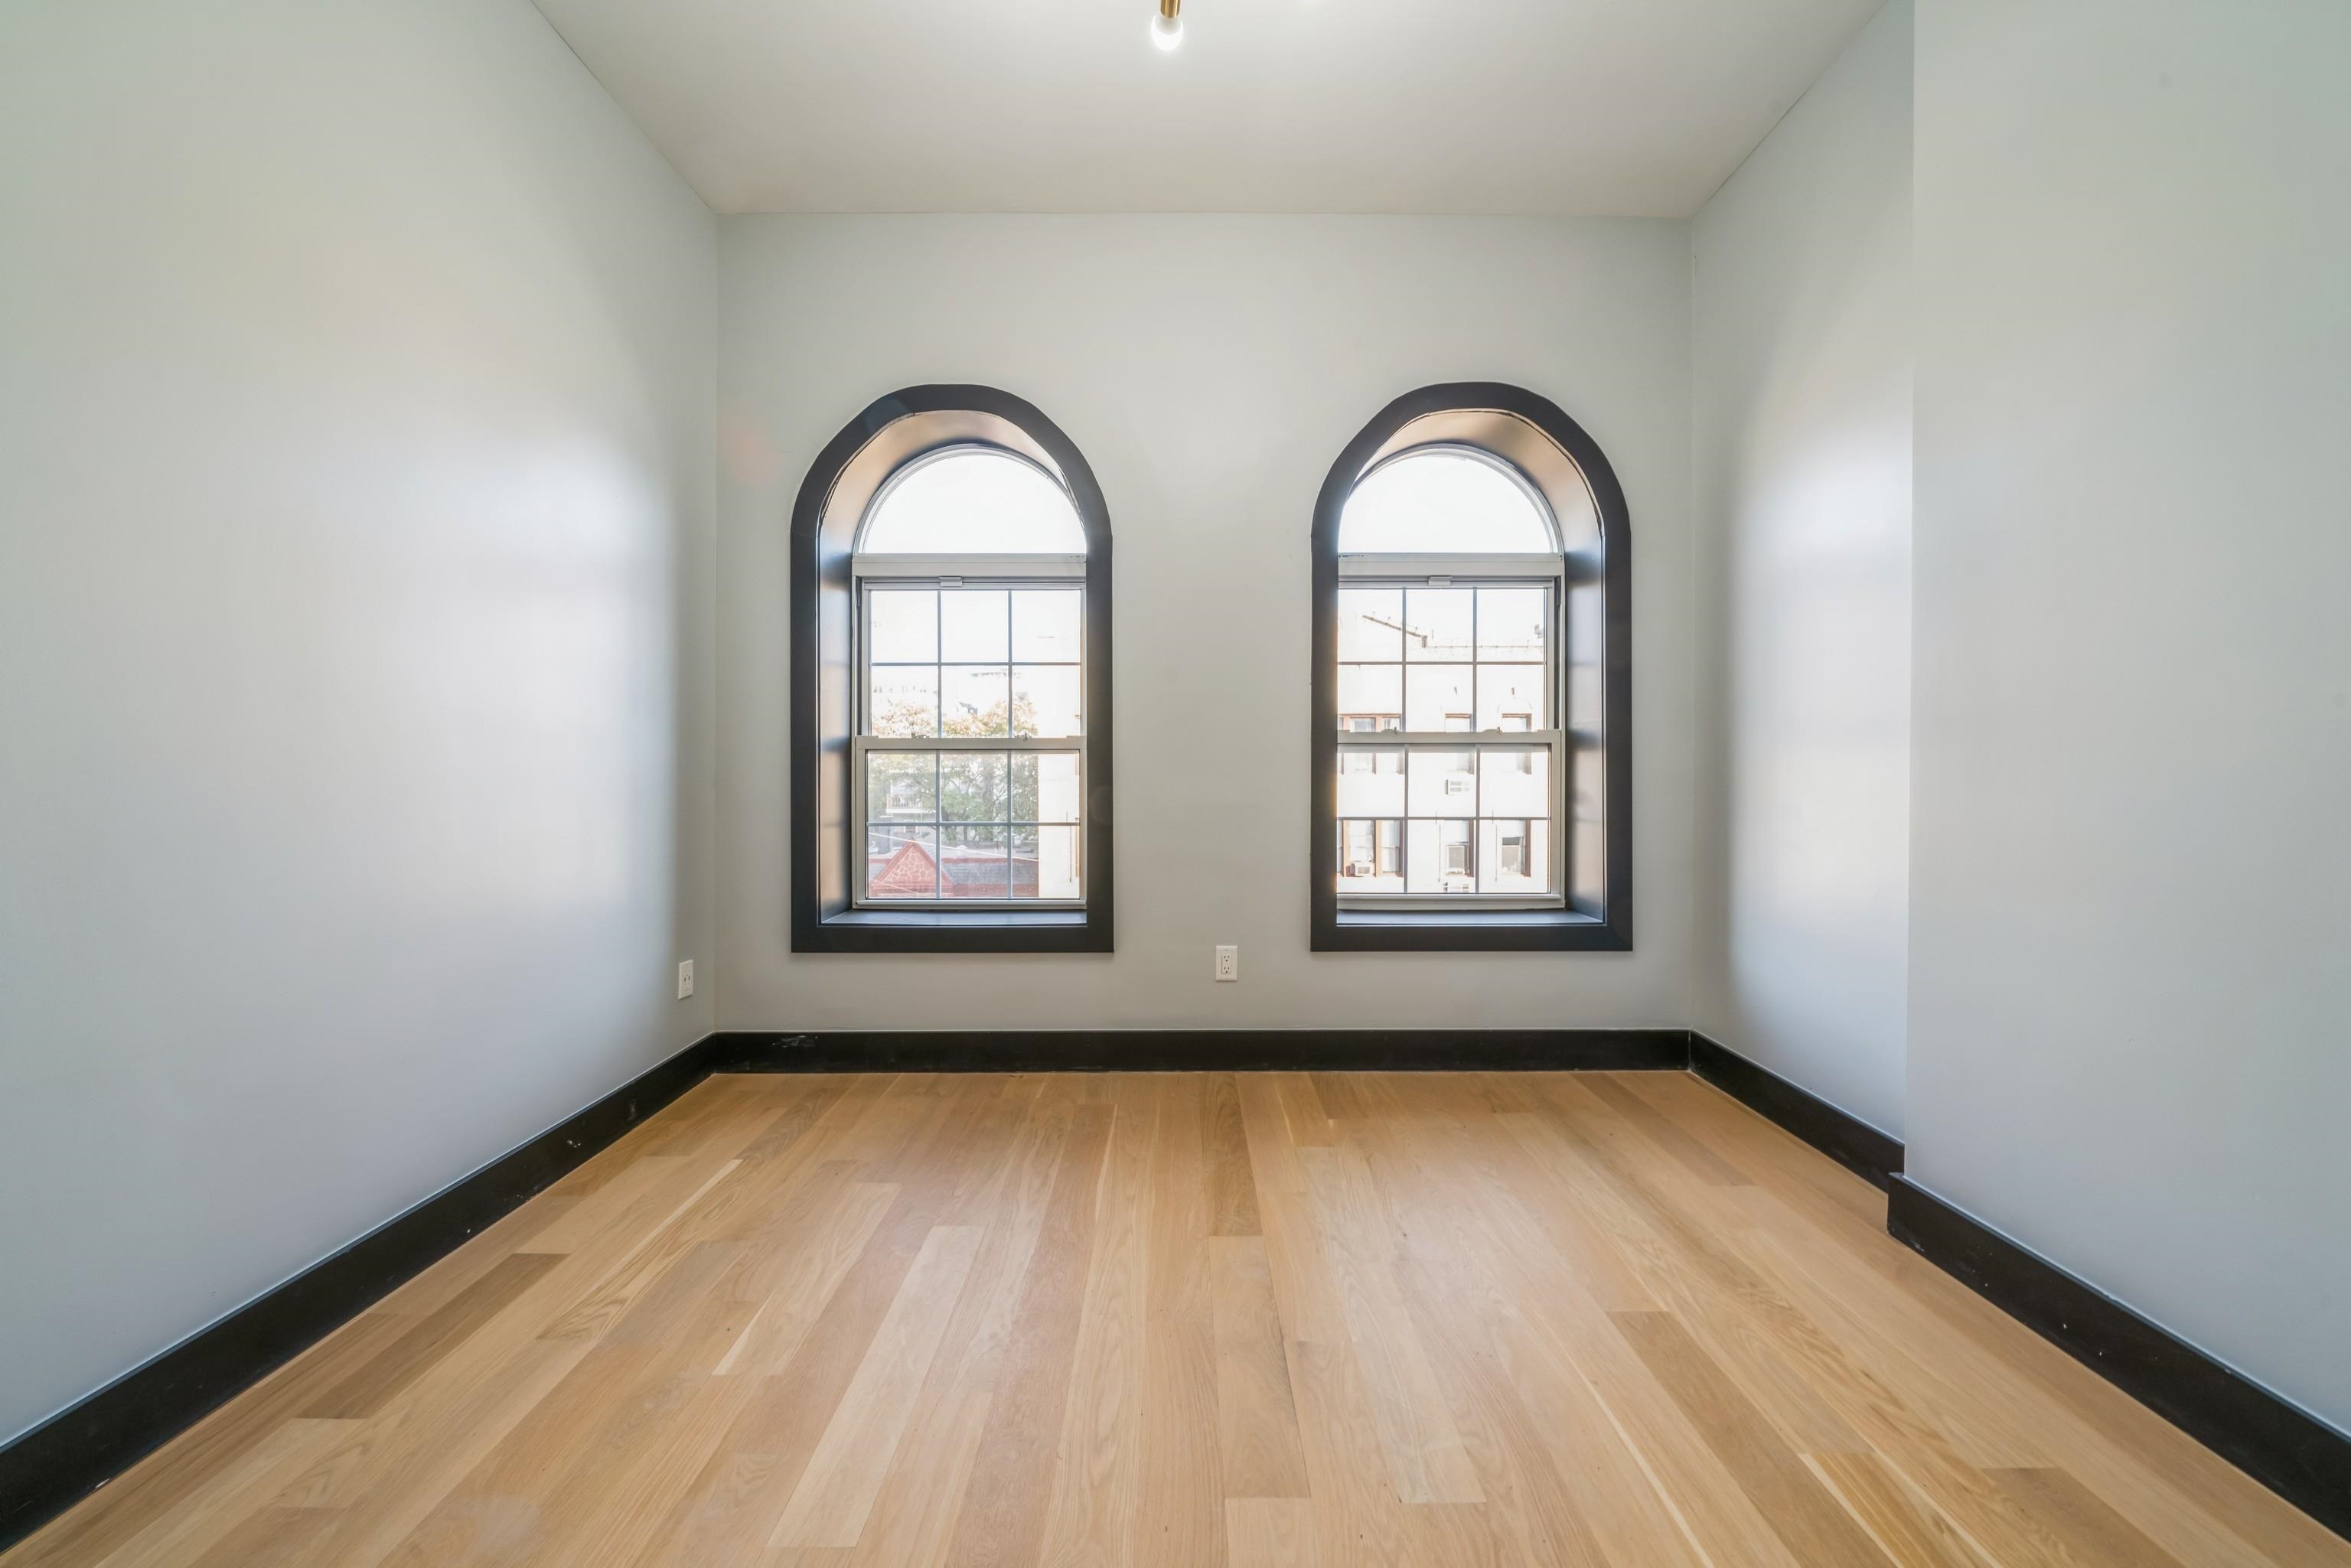 a view of a room with wooden floors and window